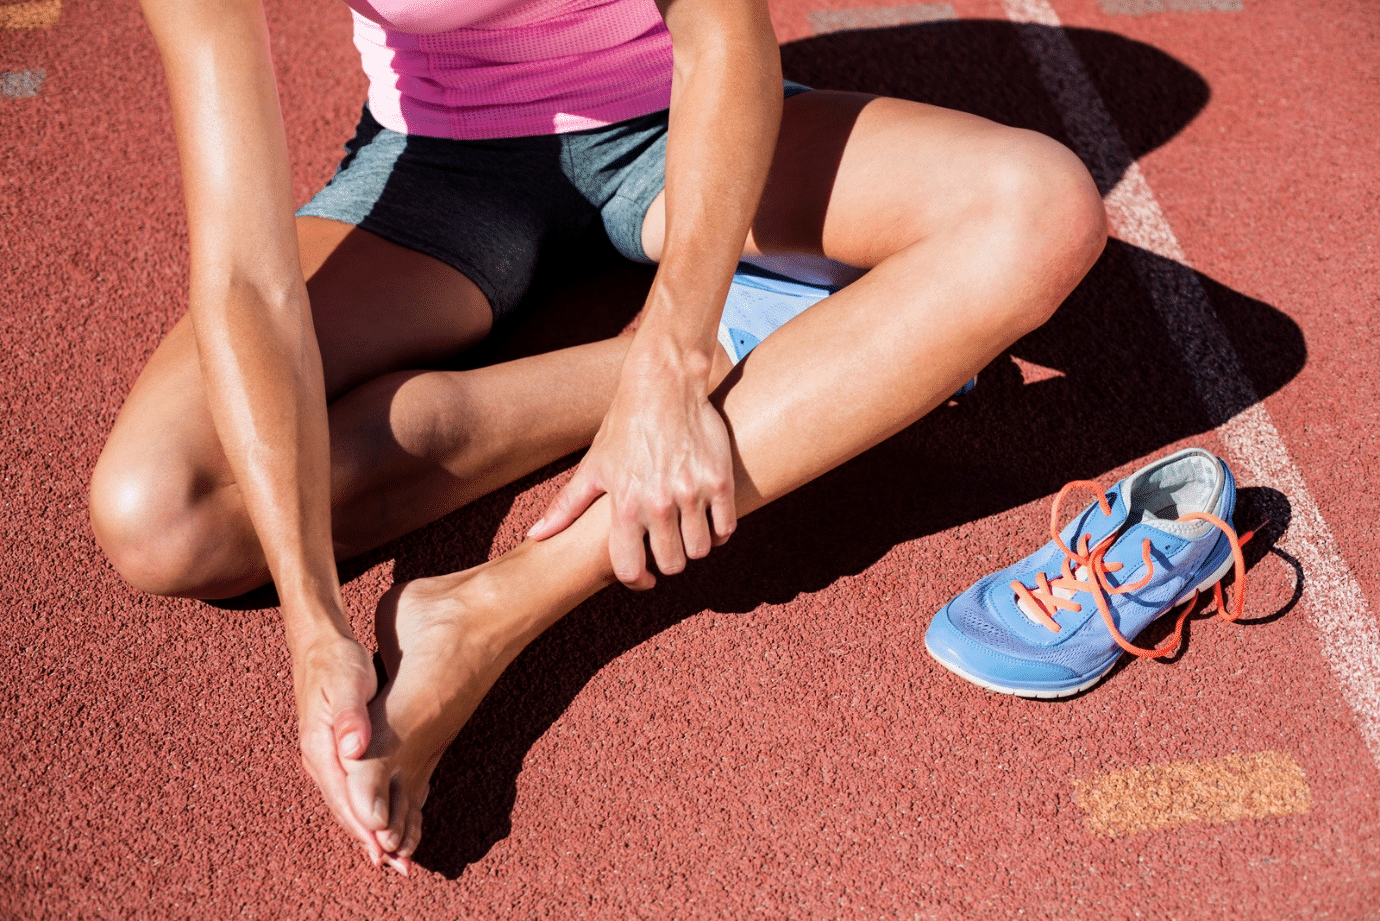 An athlete touches her foot, experiencing pain in the area.